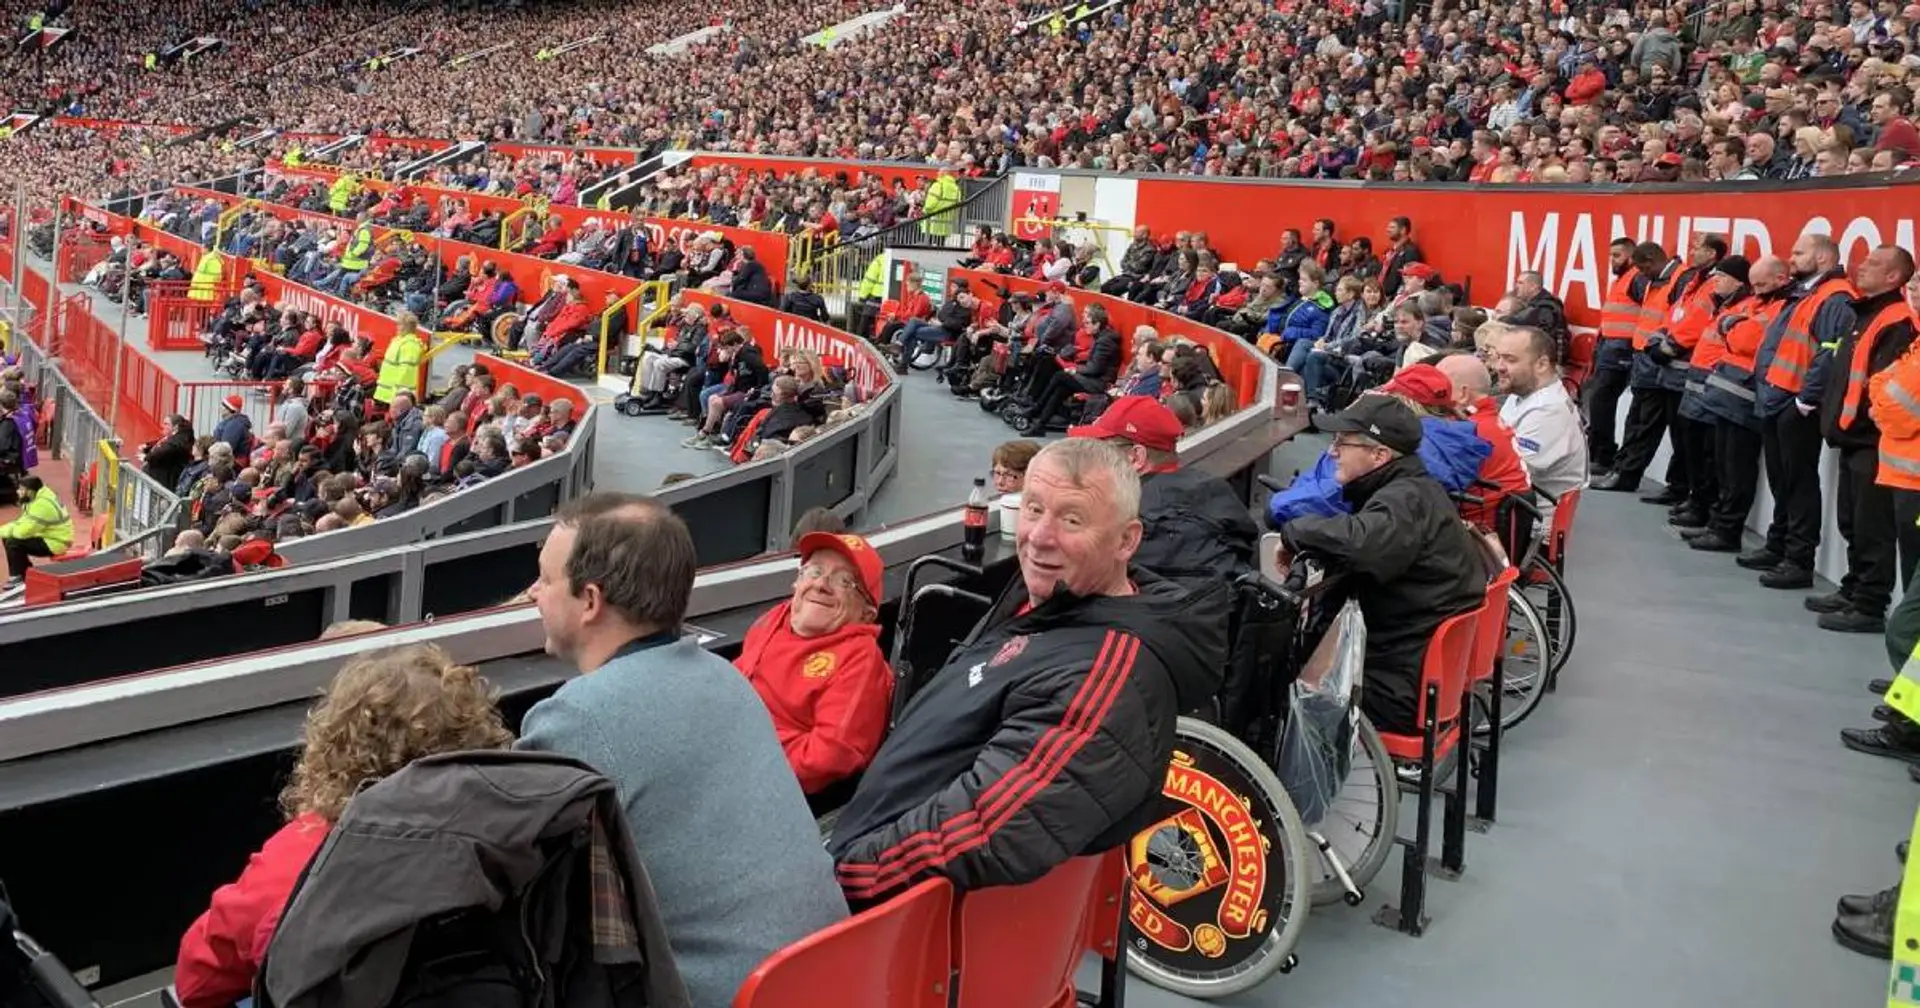 Man United fans 'posing as disabled supporters' to gain access to perks 